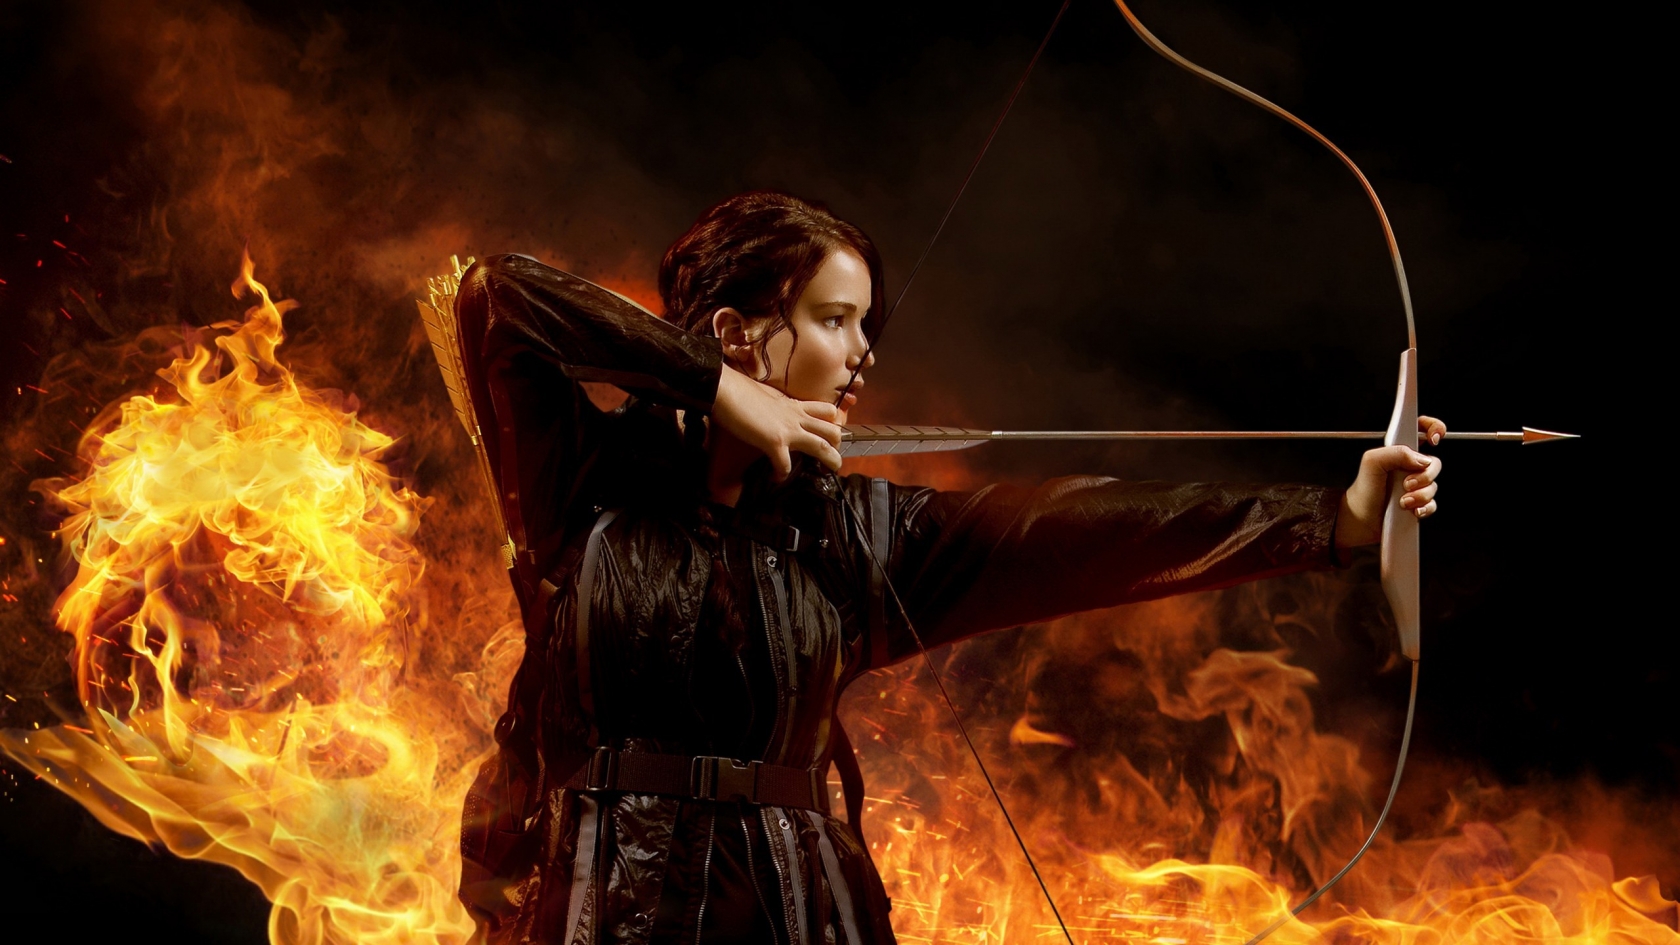 The Hunger Games 2013 for 1680 x 945 HDTV resolution